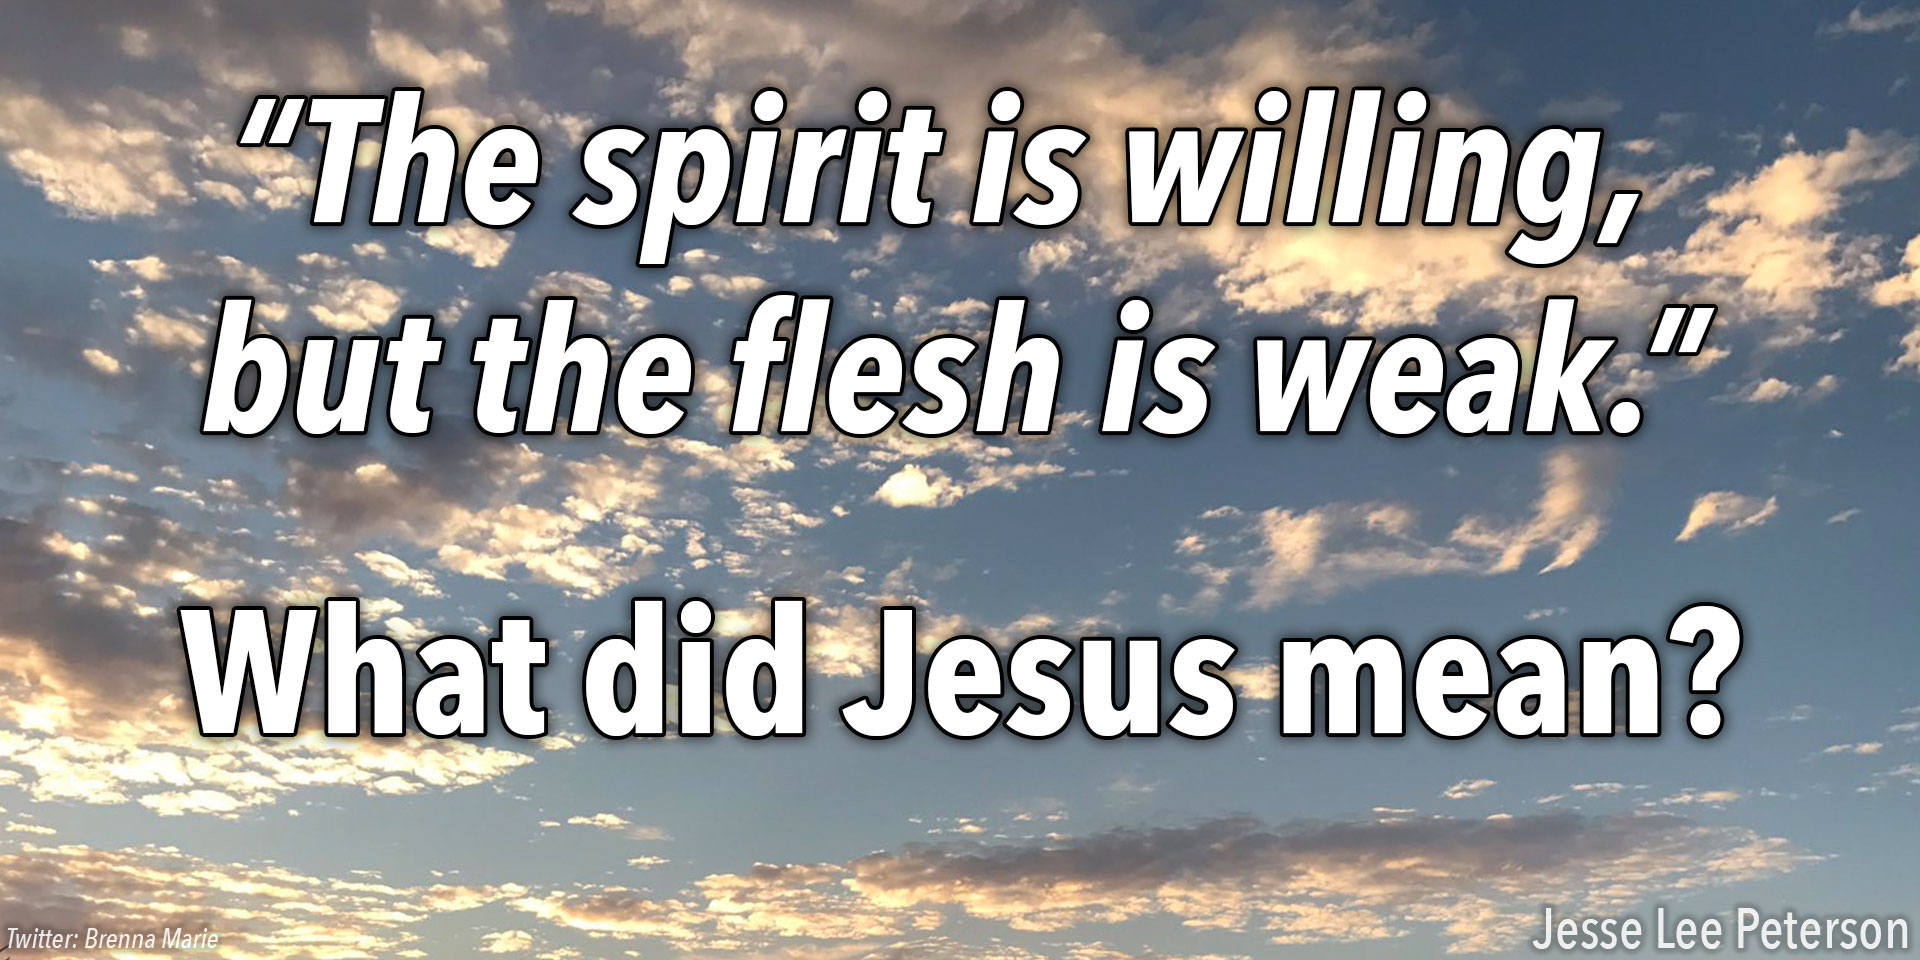 Biblical Question: "The Spirit is willing but the flesh is weak"